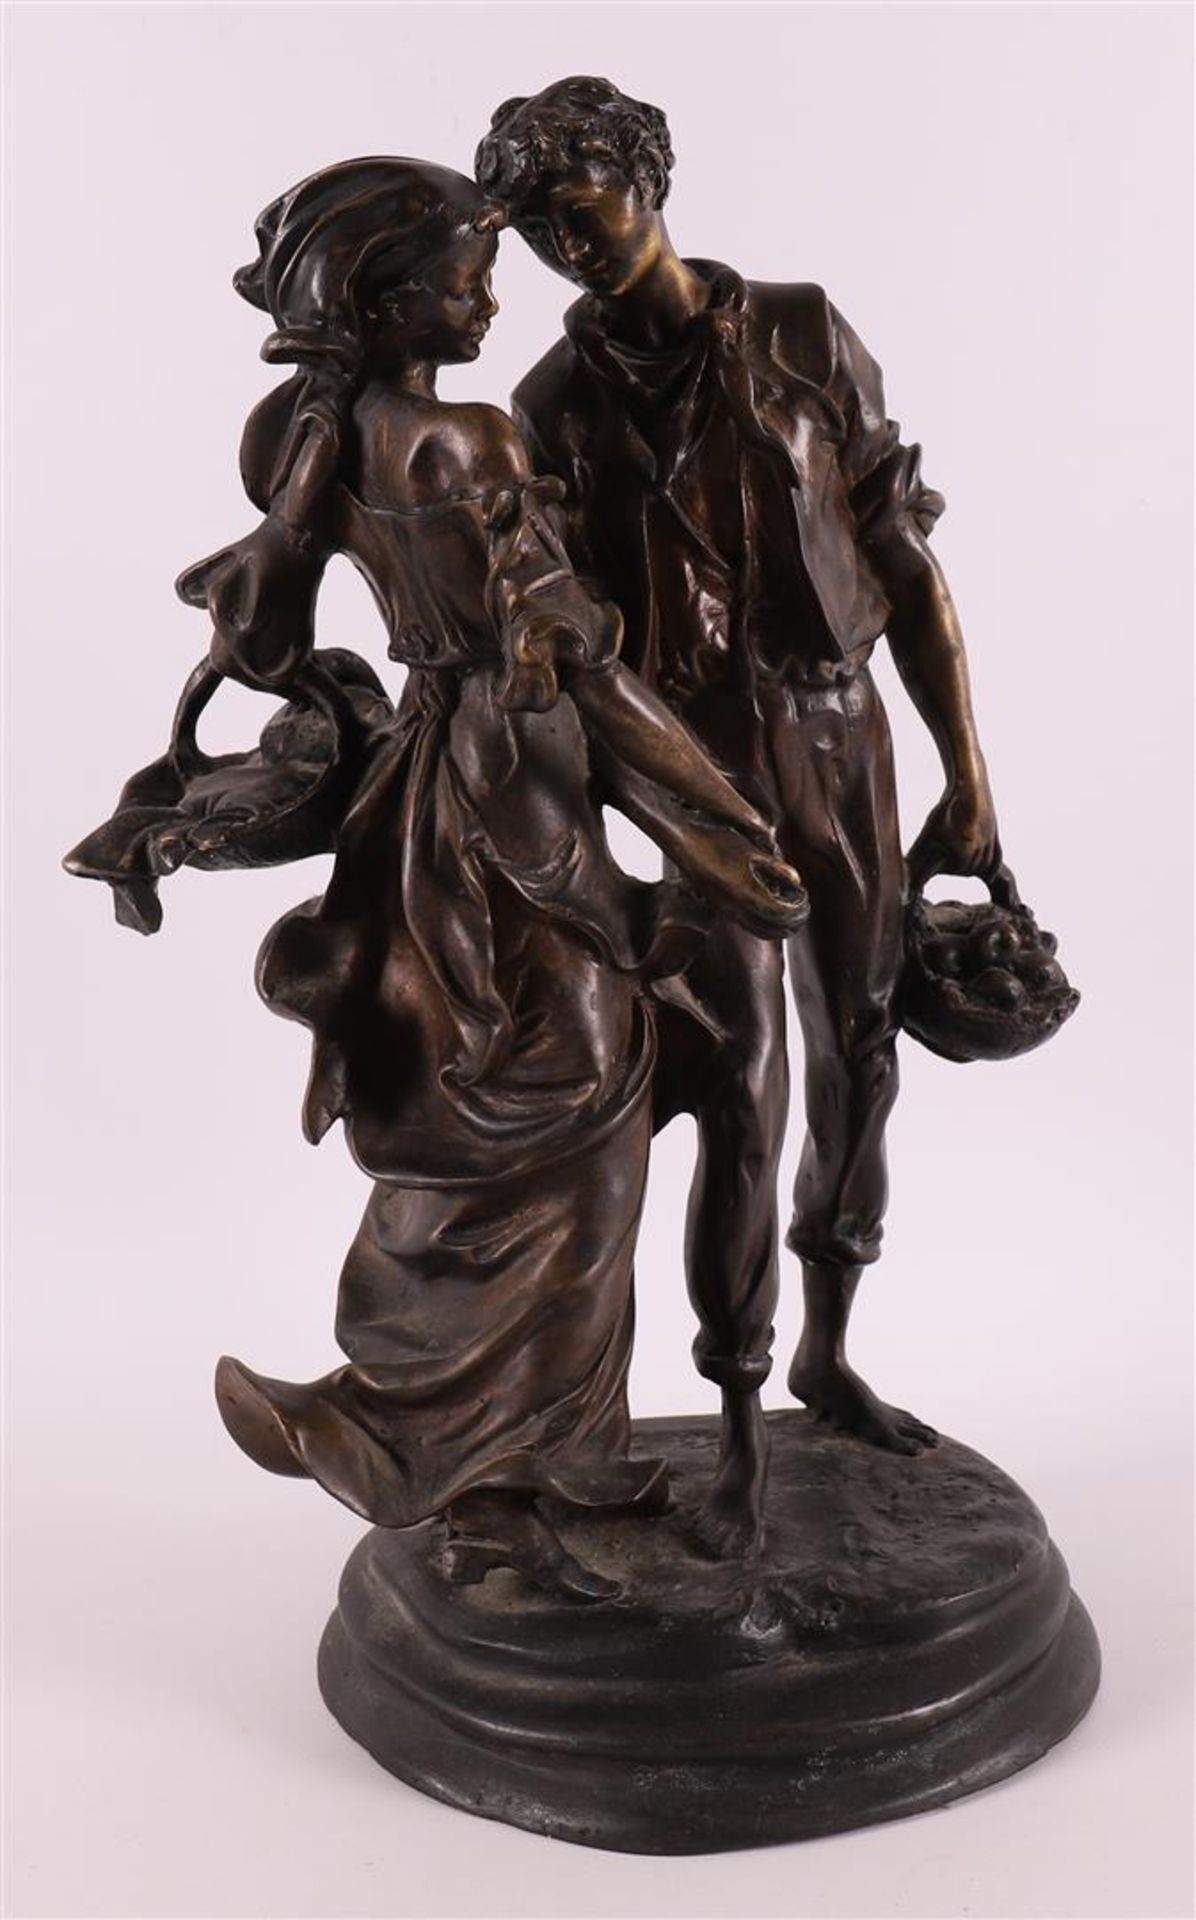 A brown patinated bronze sculpture of a man and woman, based on an antique examp